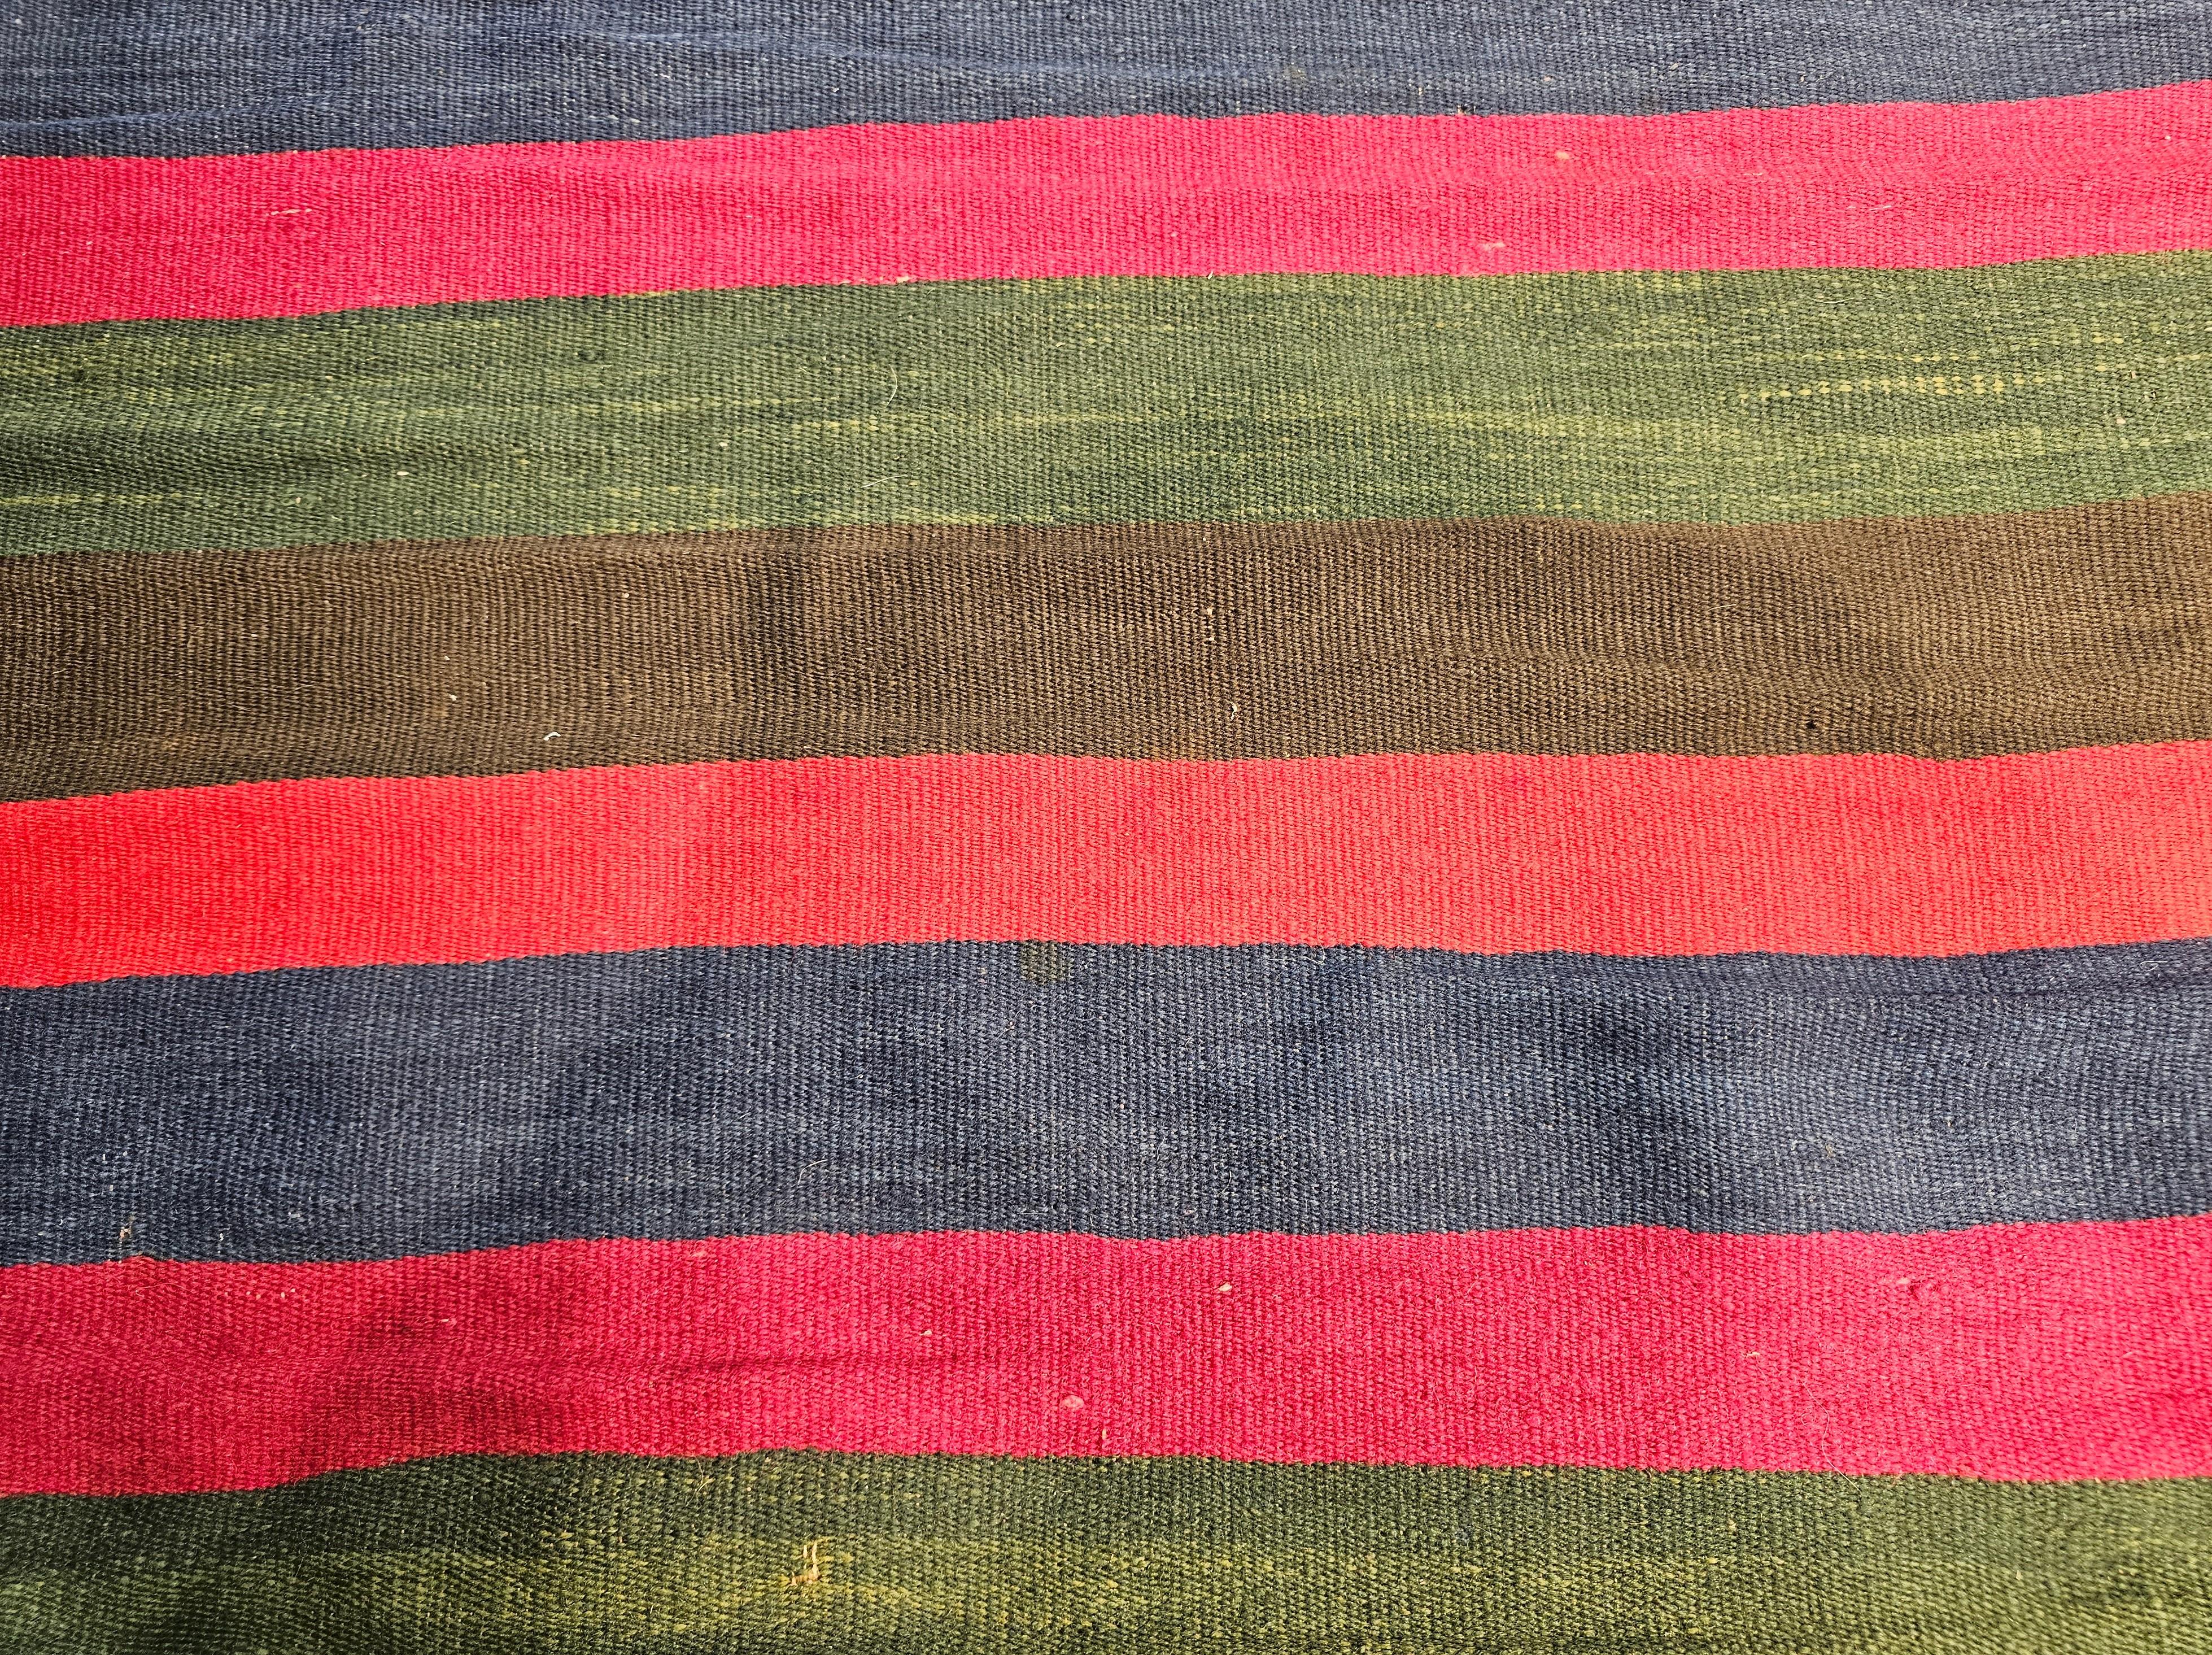 Vintage South American Hand-woven Kilim in Stripe Pattern in Magenta, Blue, Red For Sale 2